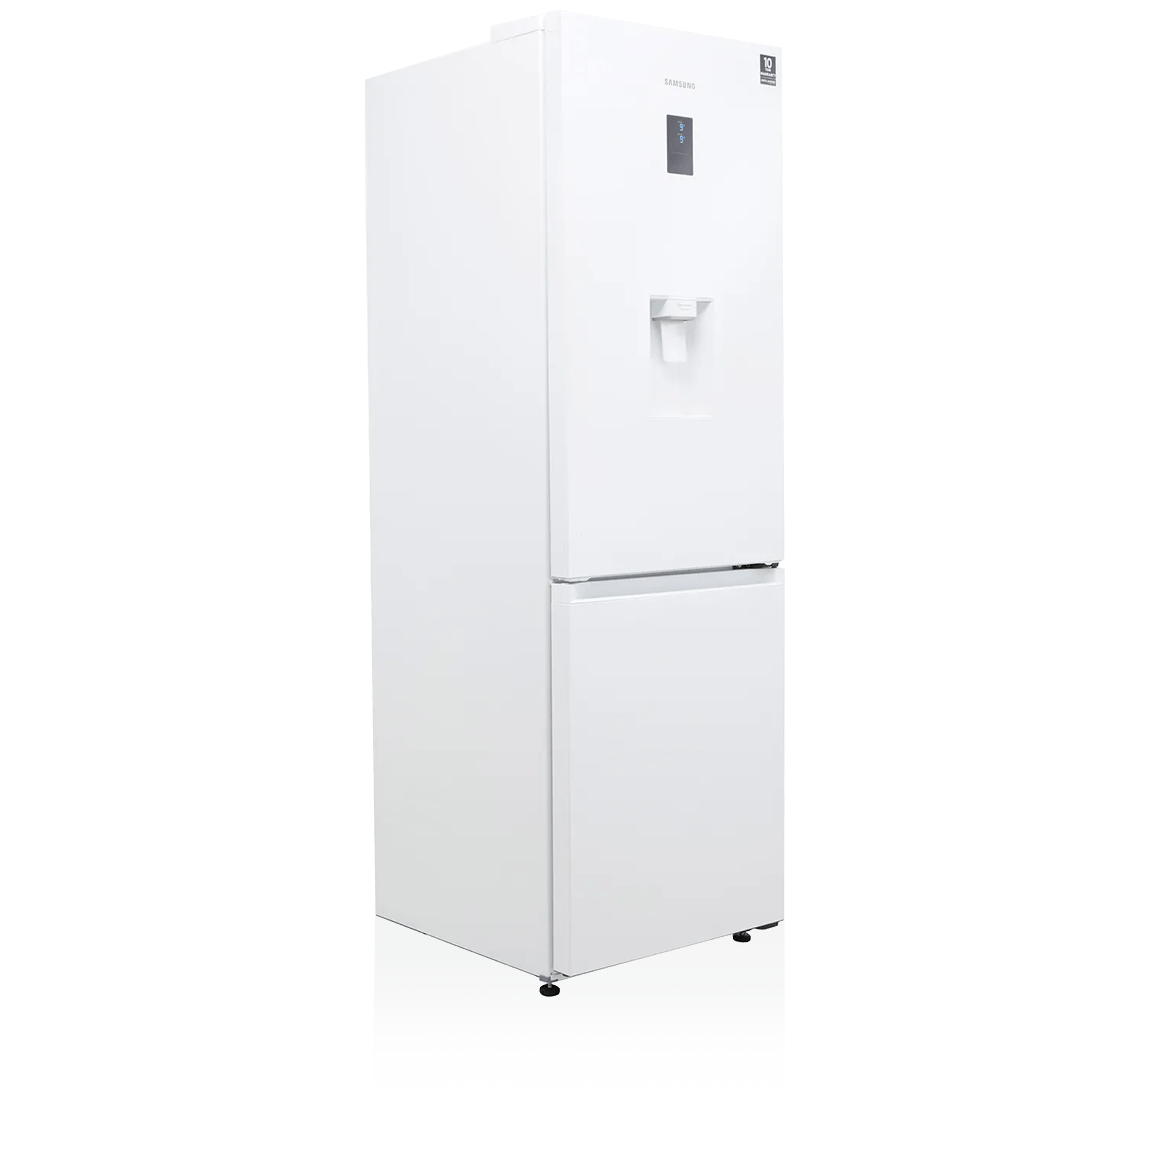 White Samsung refrigerator and freezer with a water dispenser  